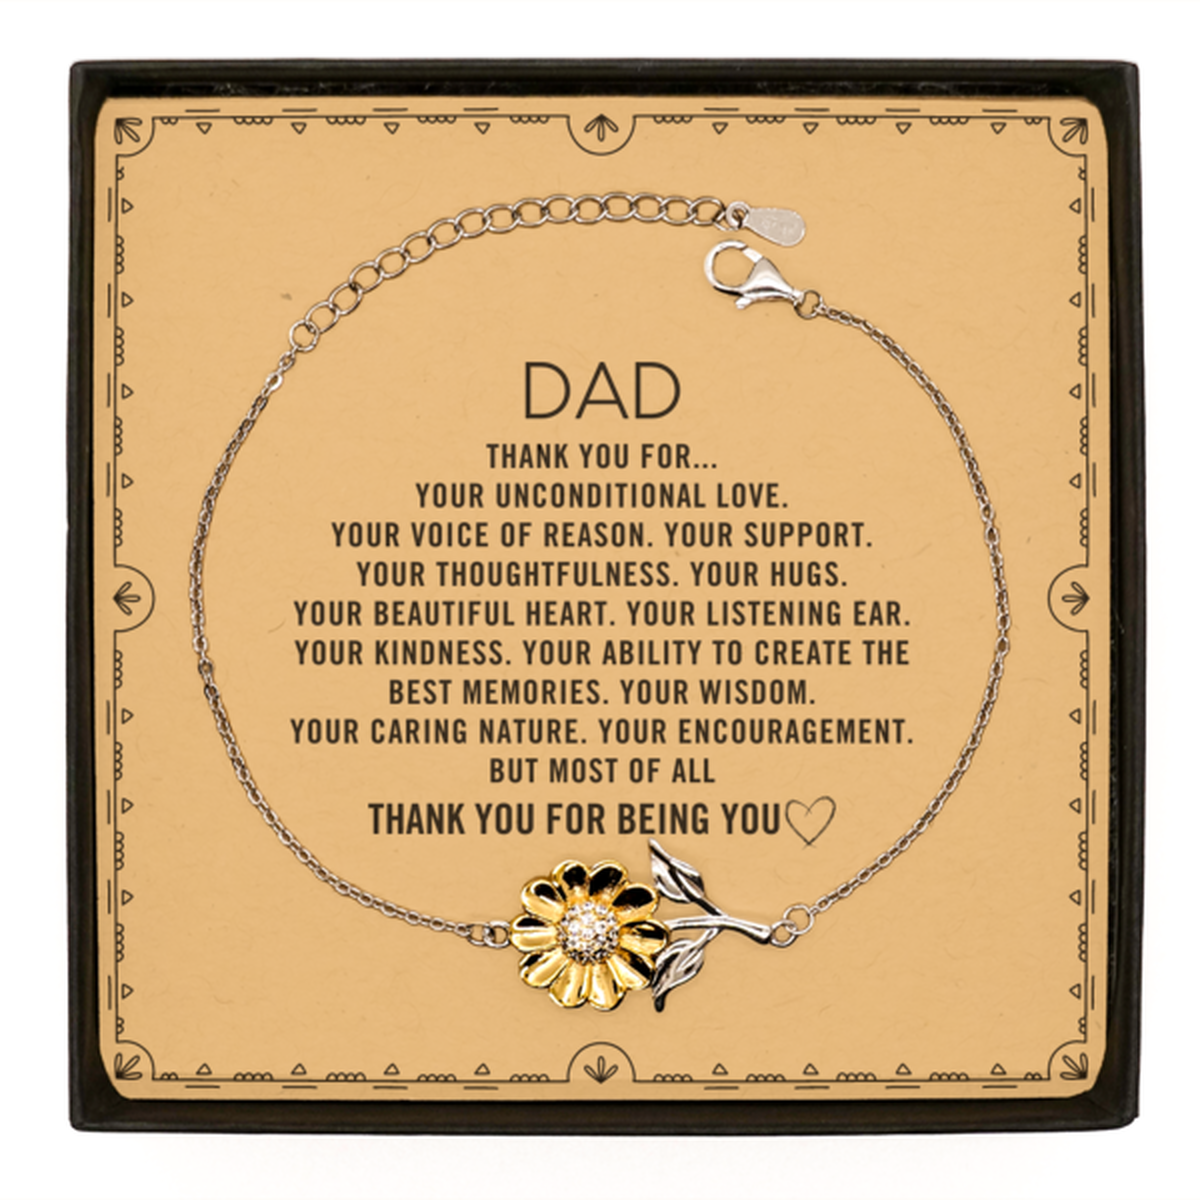 Dad Sunflower Bracelet Custom, Message Card Gifts For Dad Christmas Graduation Birthday Gifts for Men Women Dad Thank you for Your unconditional love